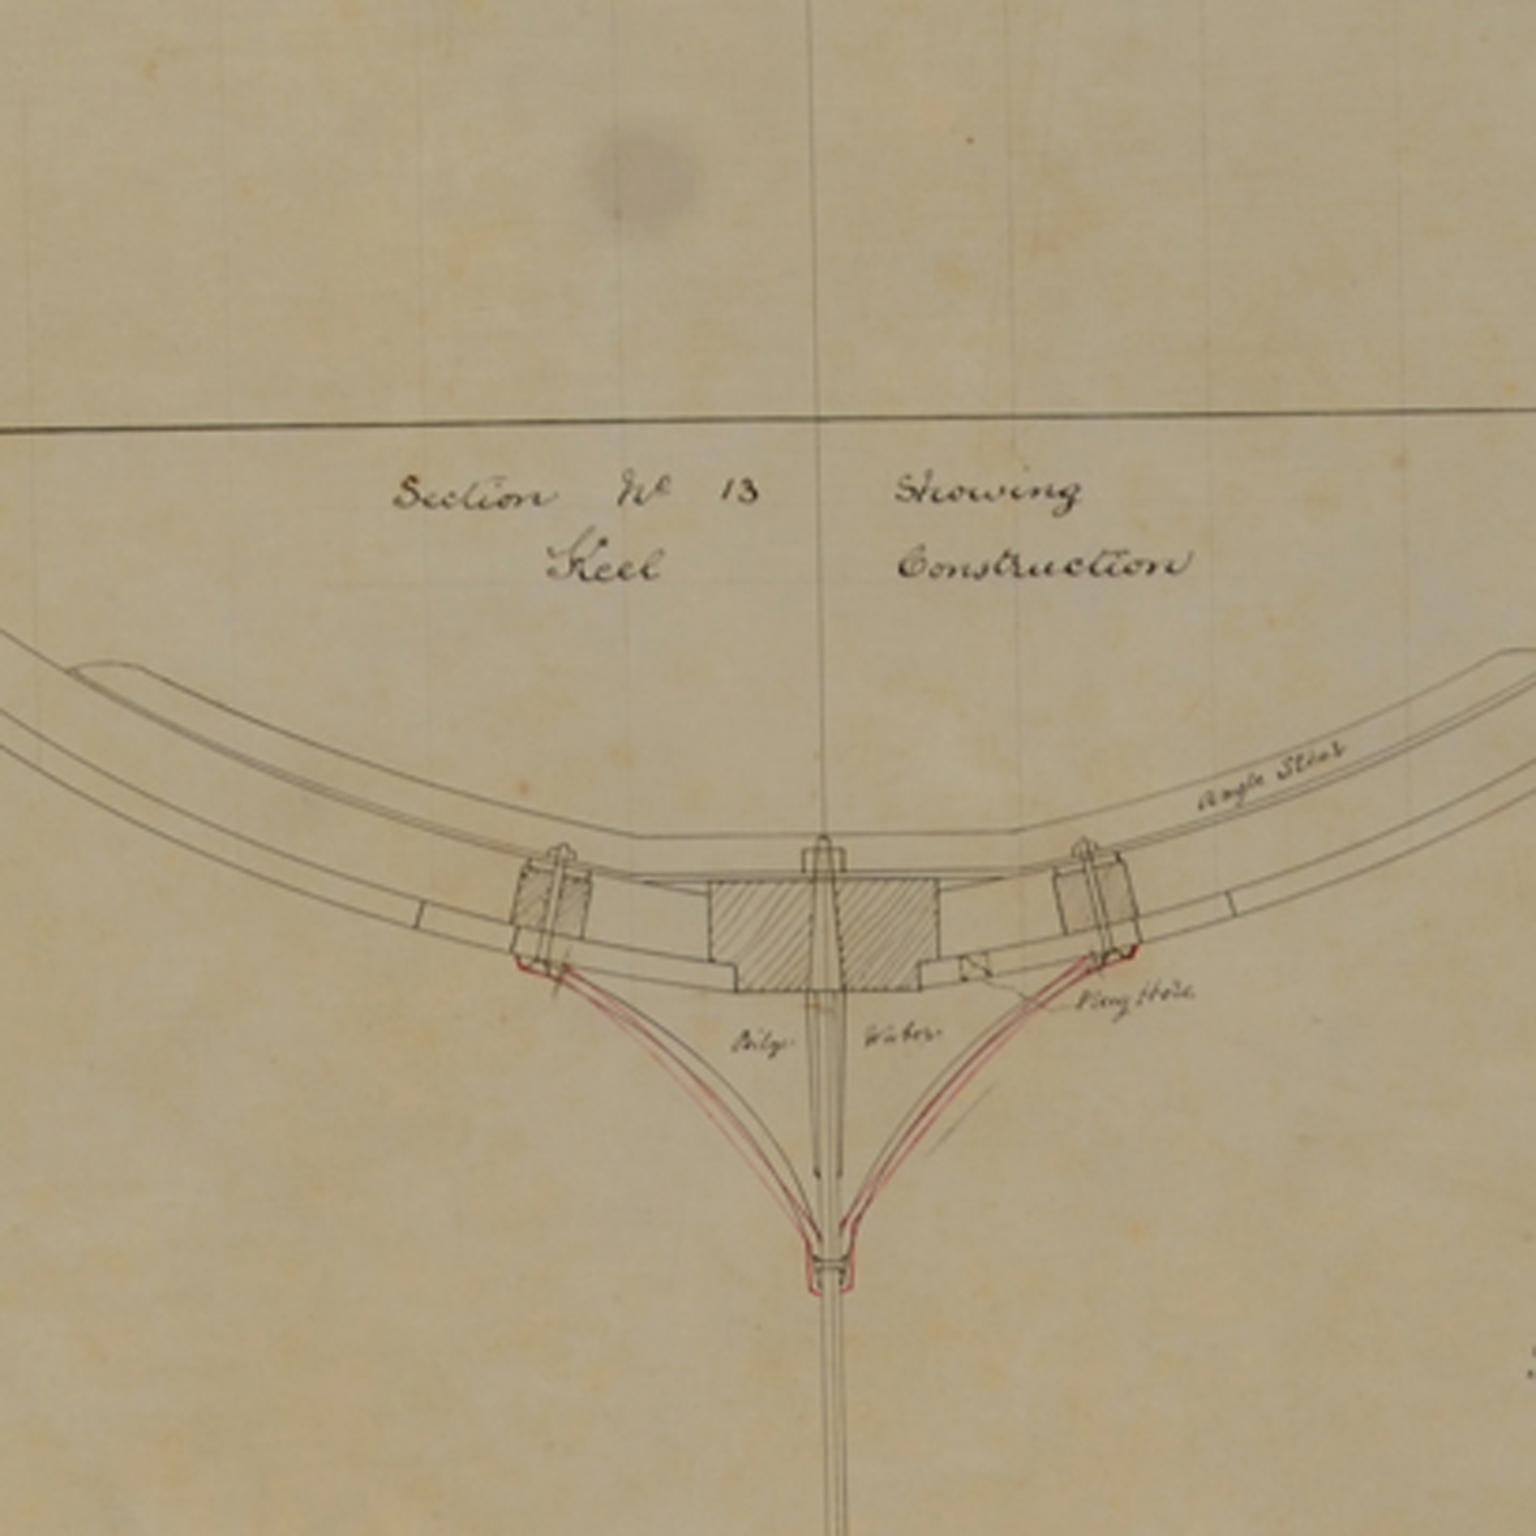 Structure of his favourite kind of keel by Charles Sibbick the designer, similar to the modern boats racing today in America's cup. It is a part of a project for a 52' linear rater for Mr E. More Esq. Cm 58 x 42 (H) - inches 22.83 x 16.53 (H).